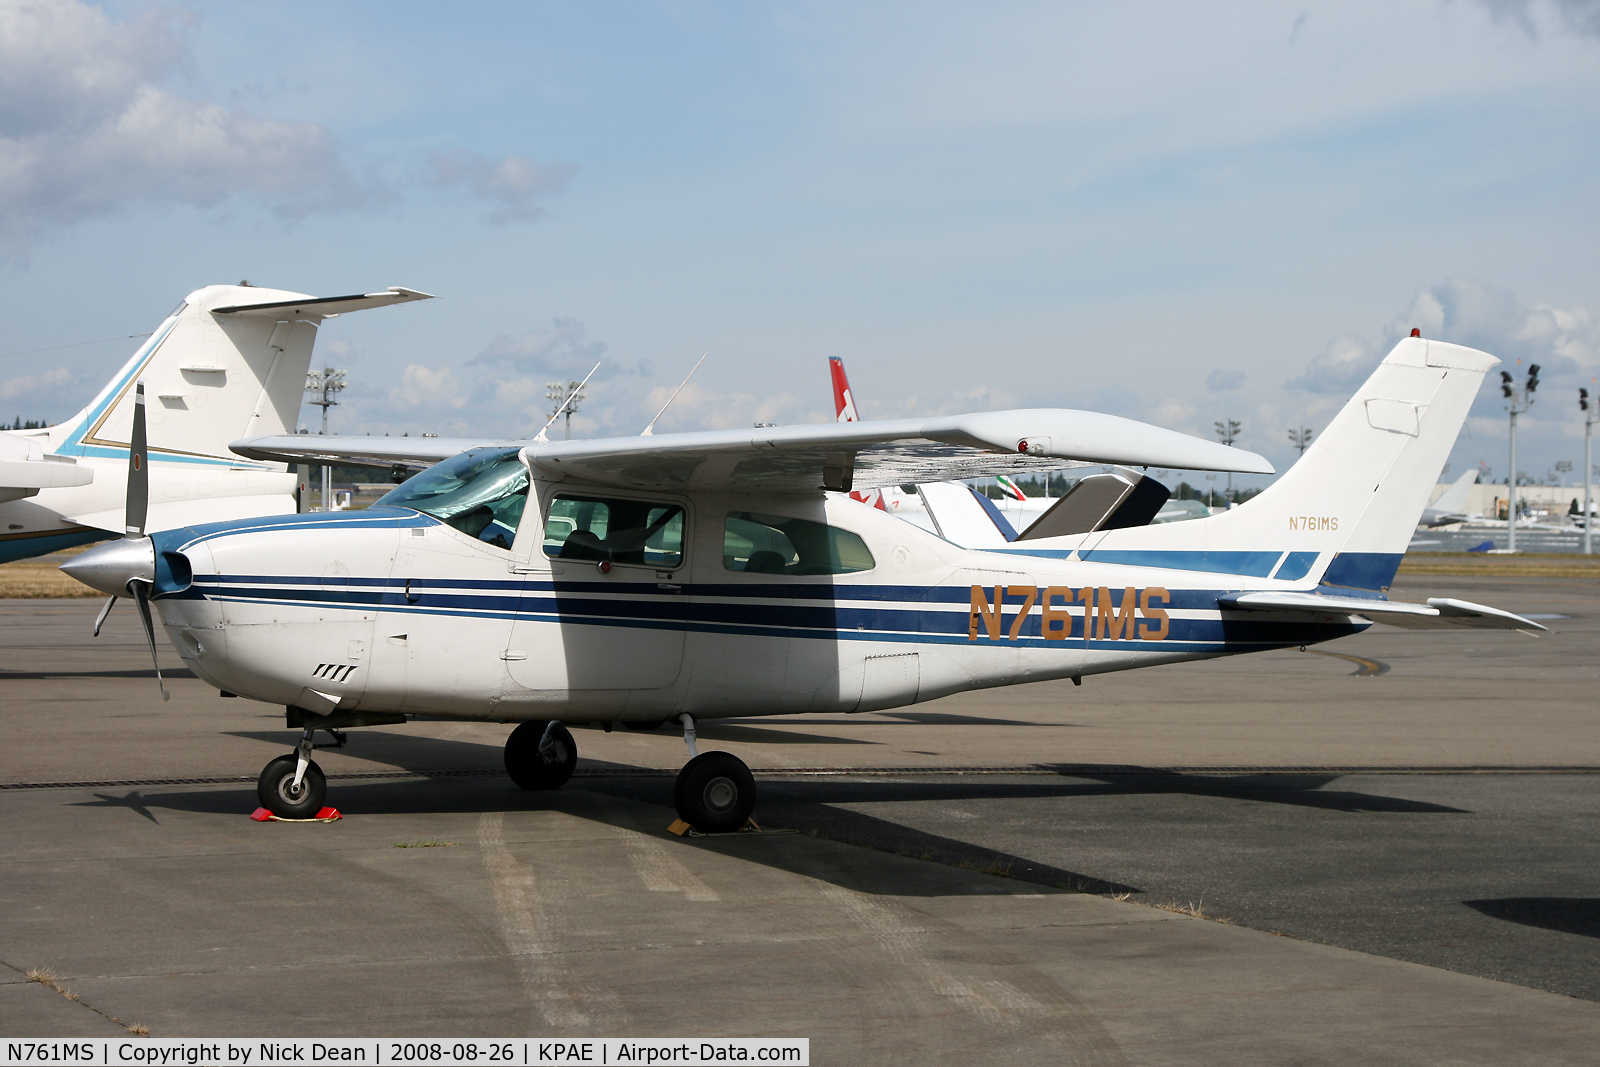 N761MS, 1977 Cessna T210M Turbo Centurion C/N 21062369, Another visitor